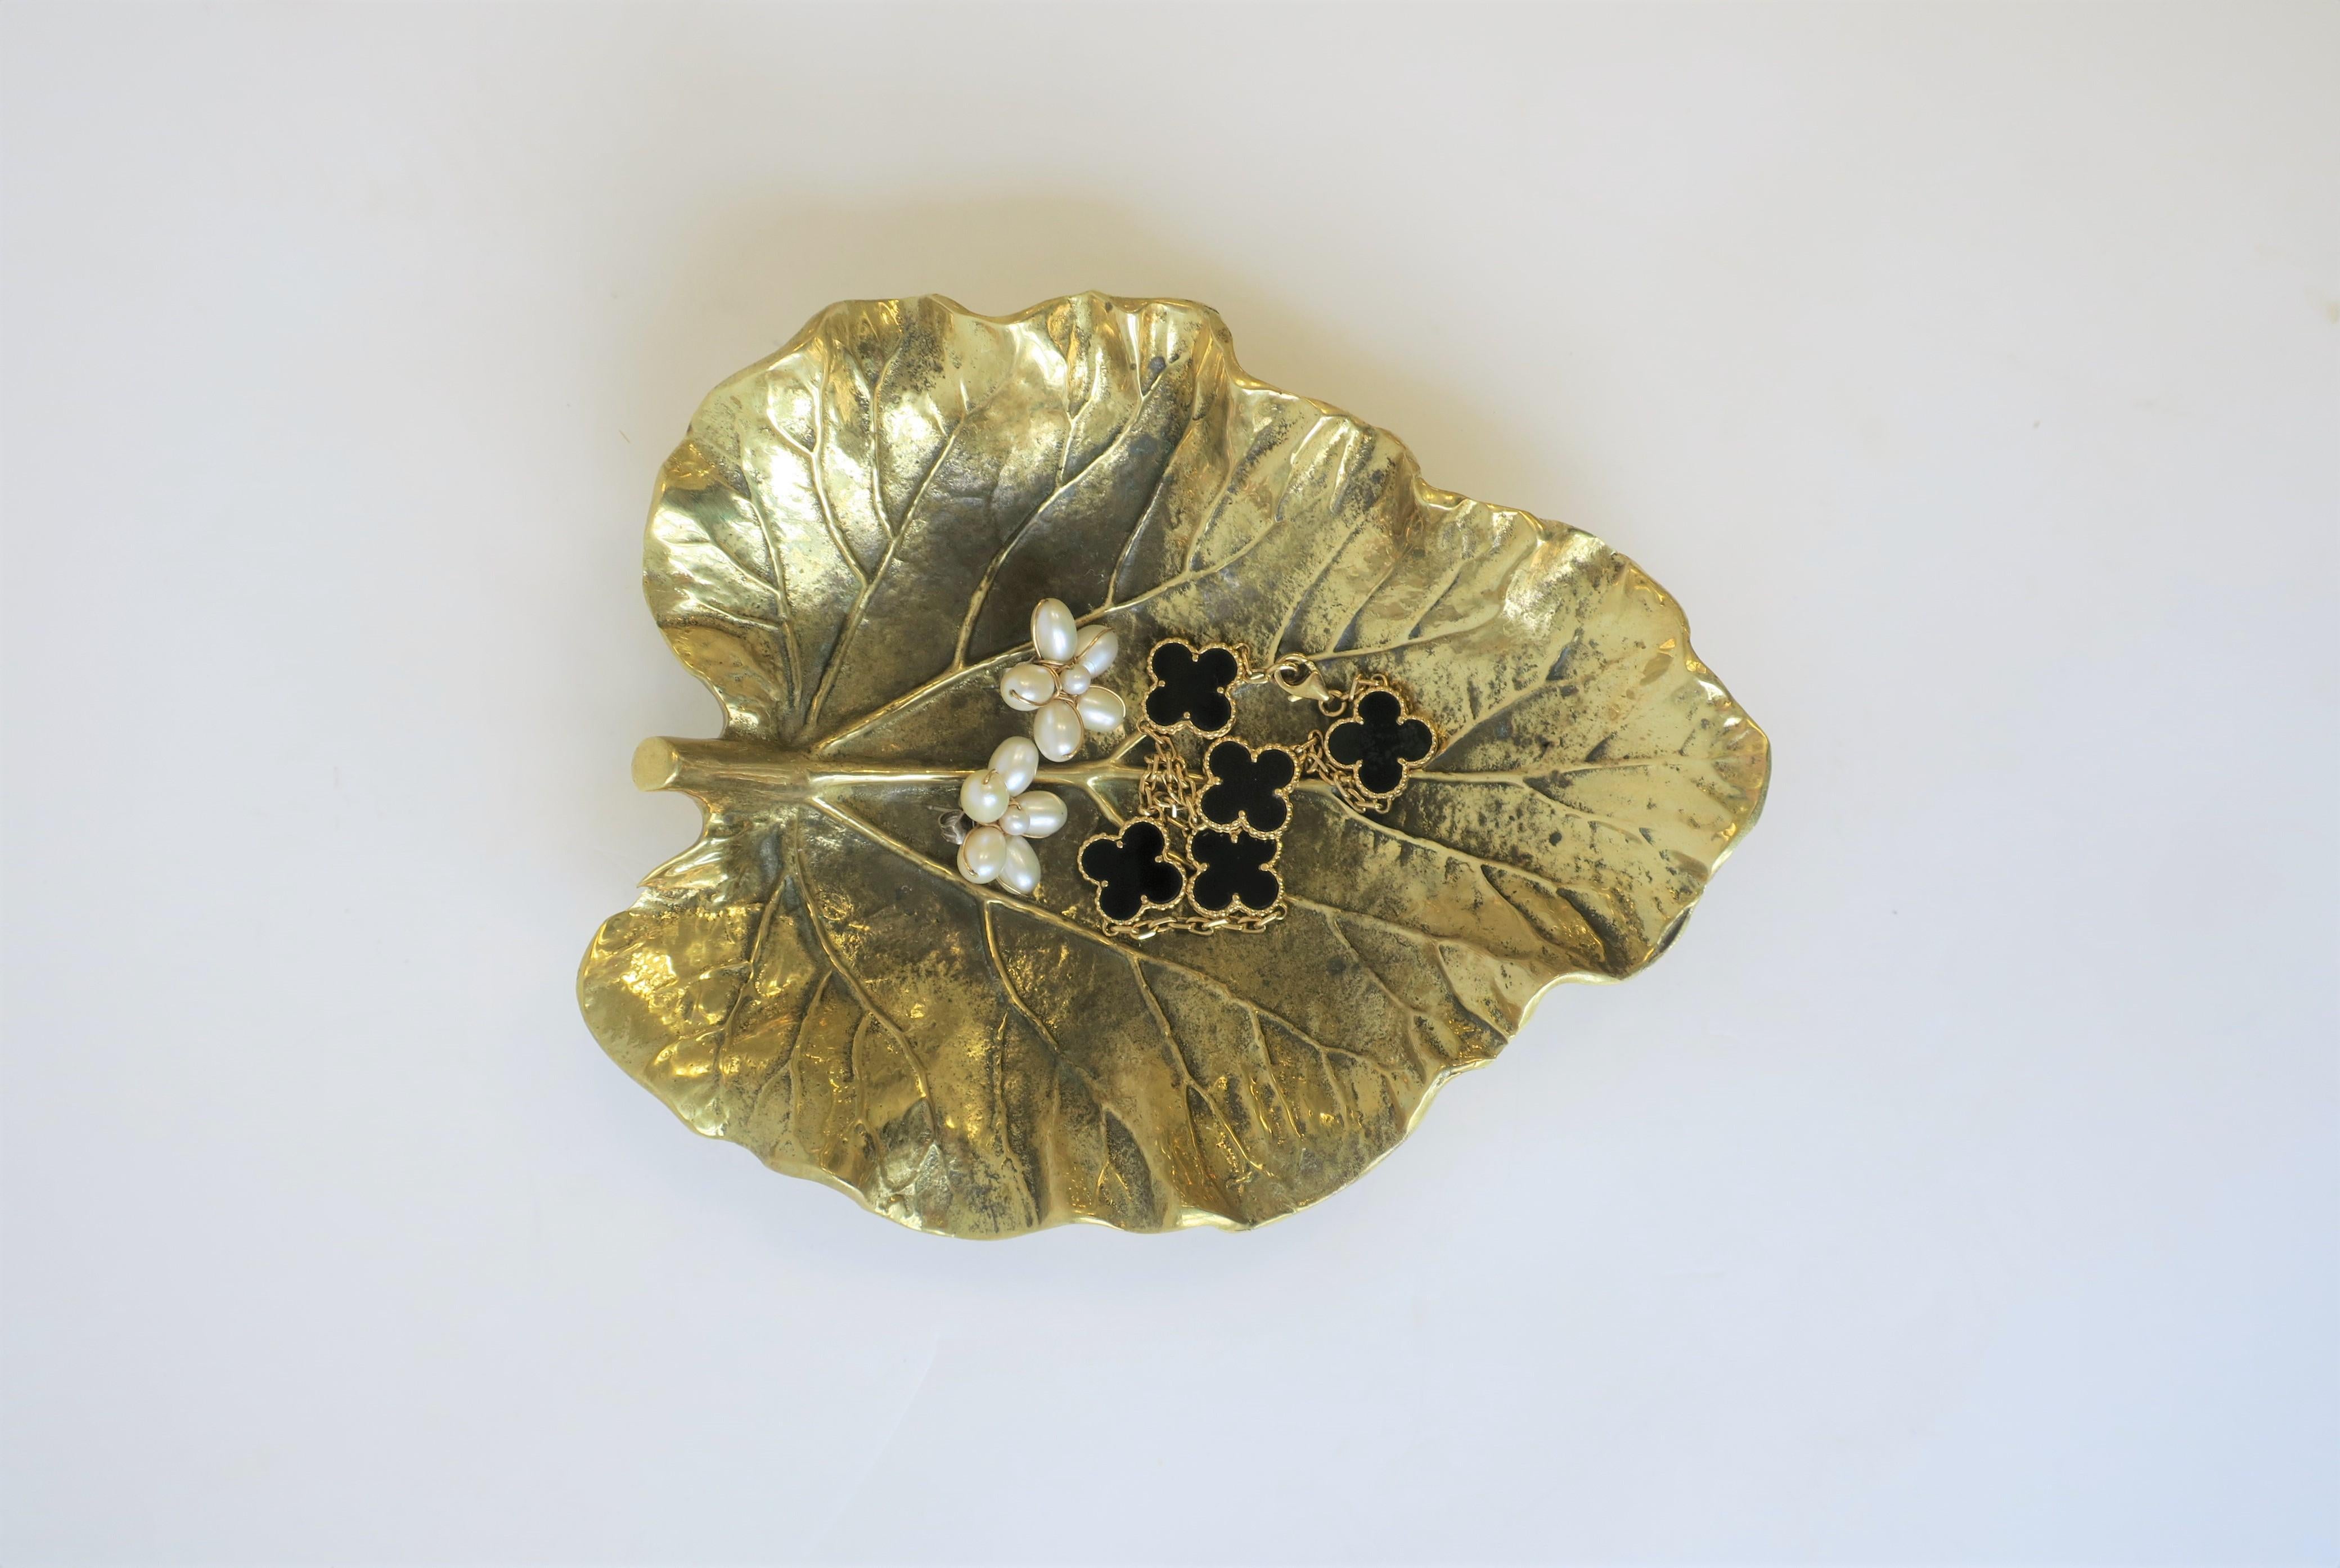 20th Century Gold Brass Decorative Leaf Plate or Jewelry Dish